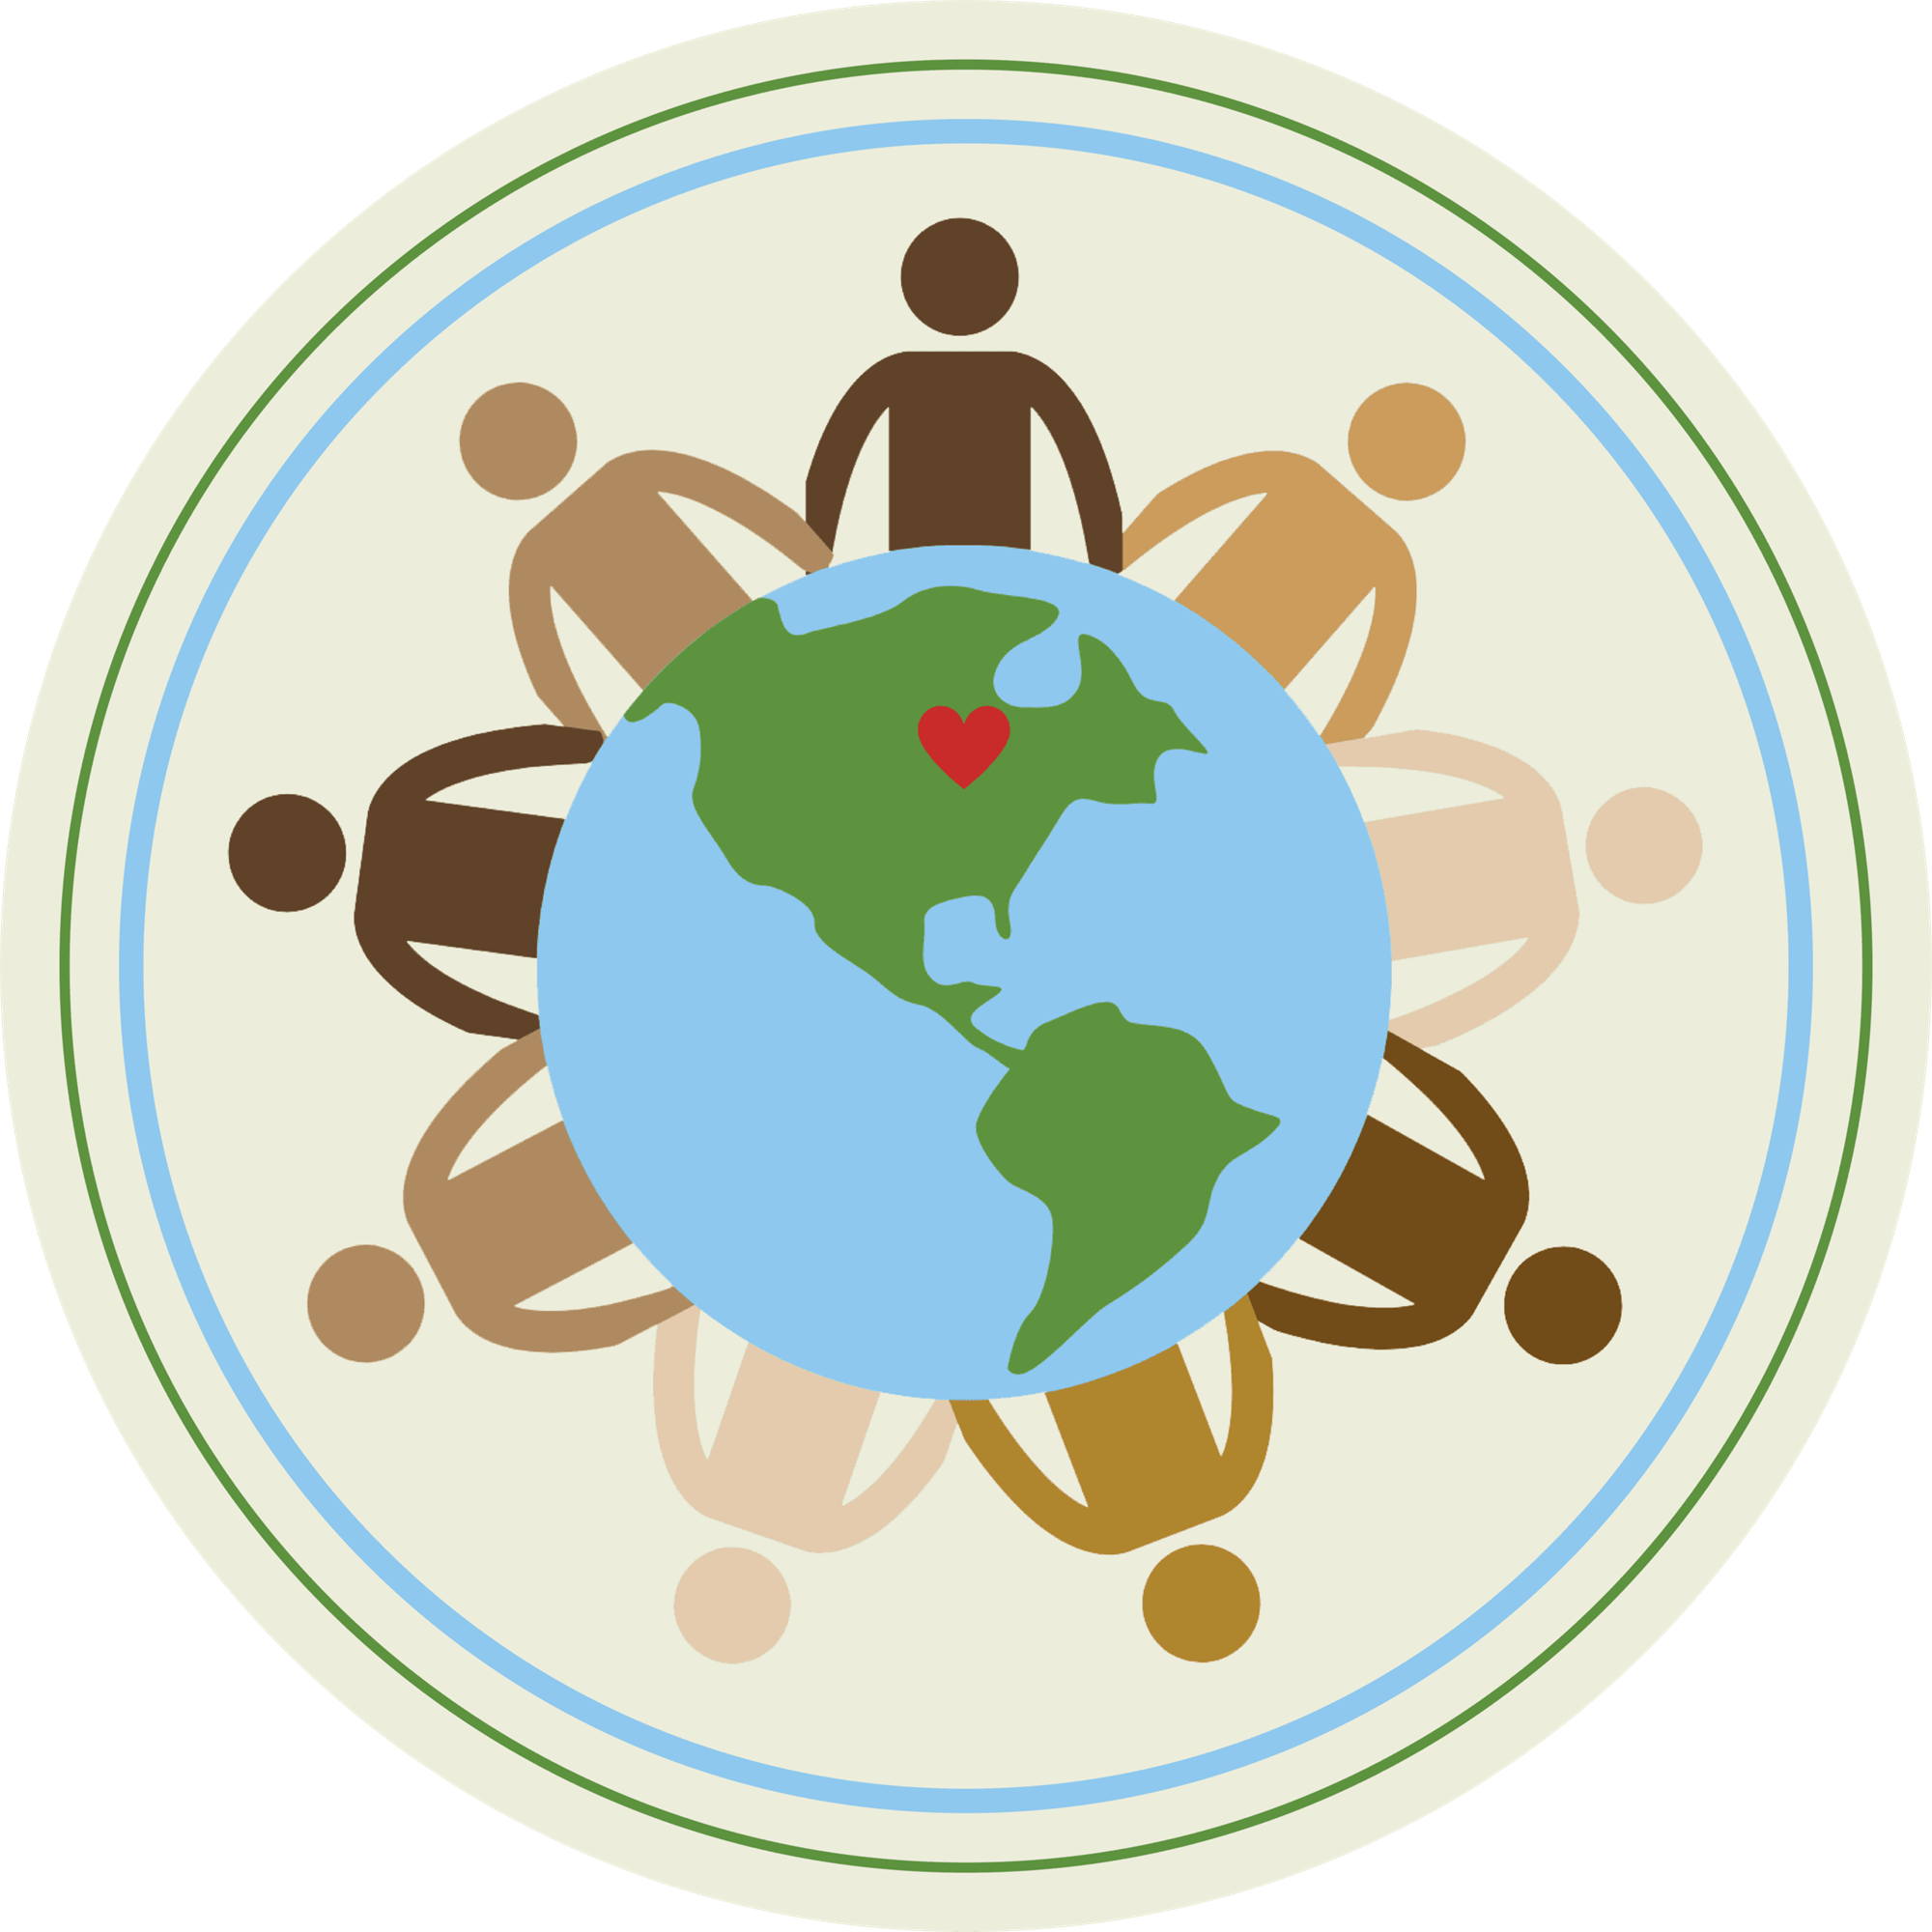 Illustration of Earth encircled by the upper bodies of stick figure people of different skin colors holding hands